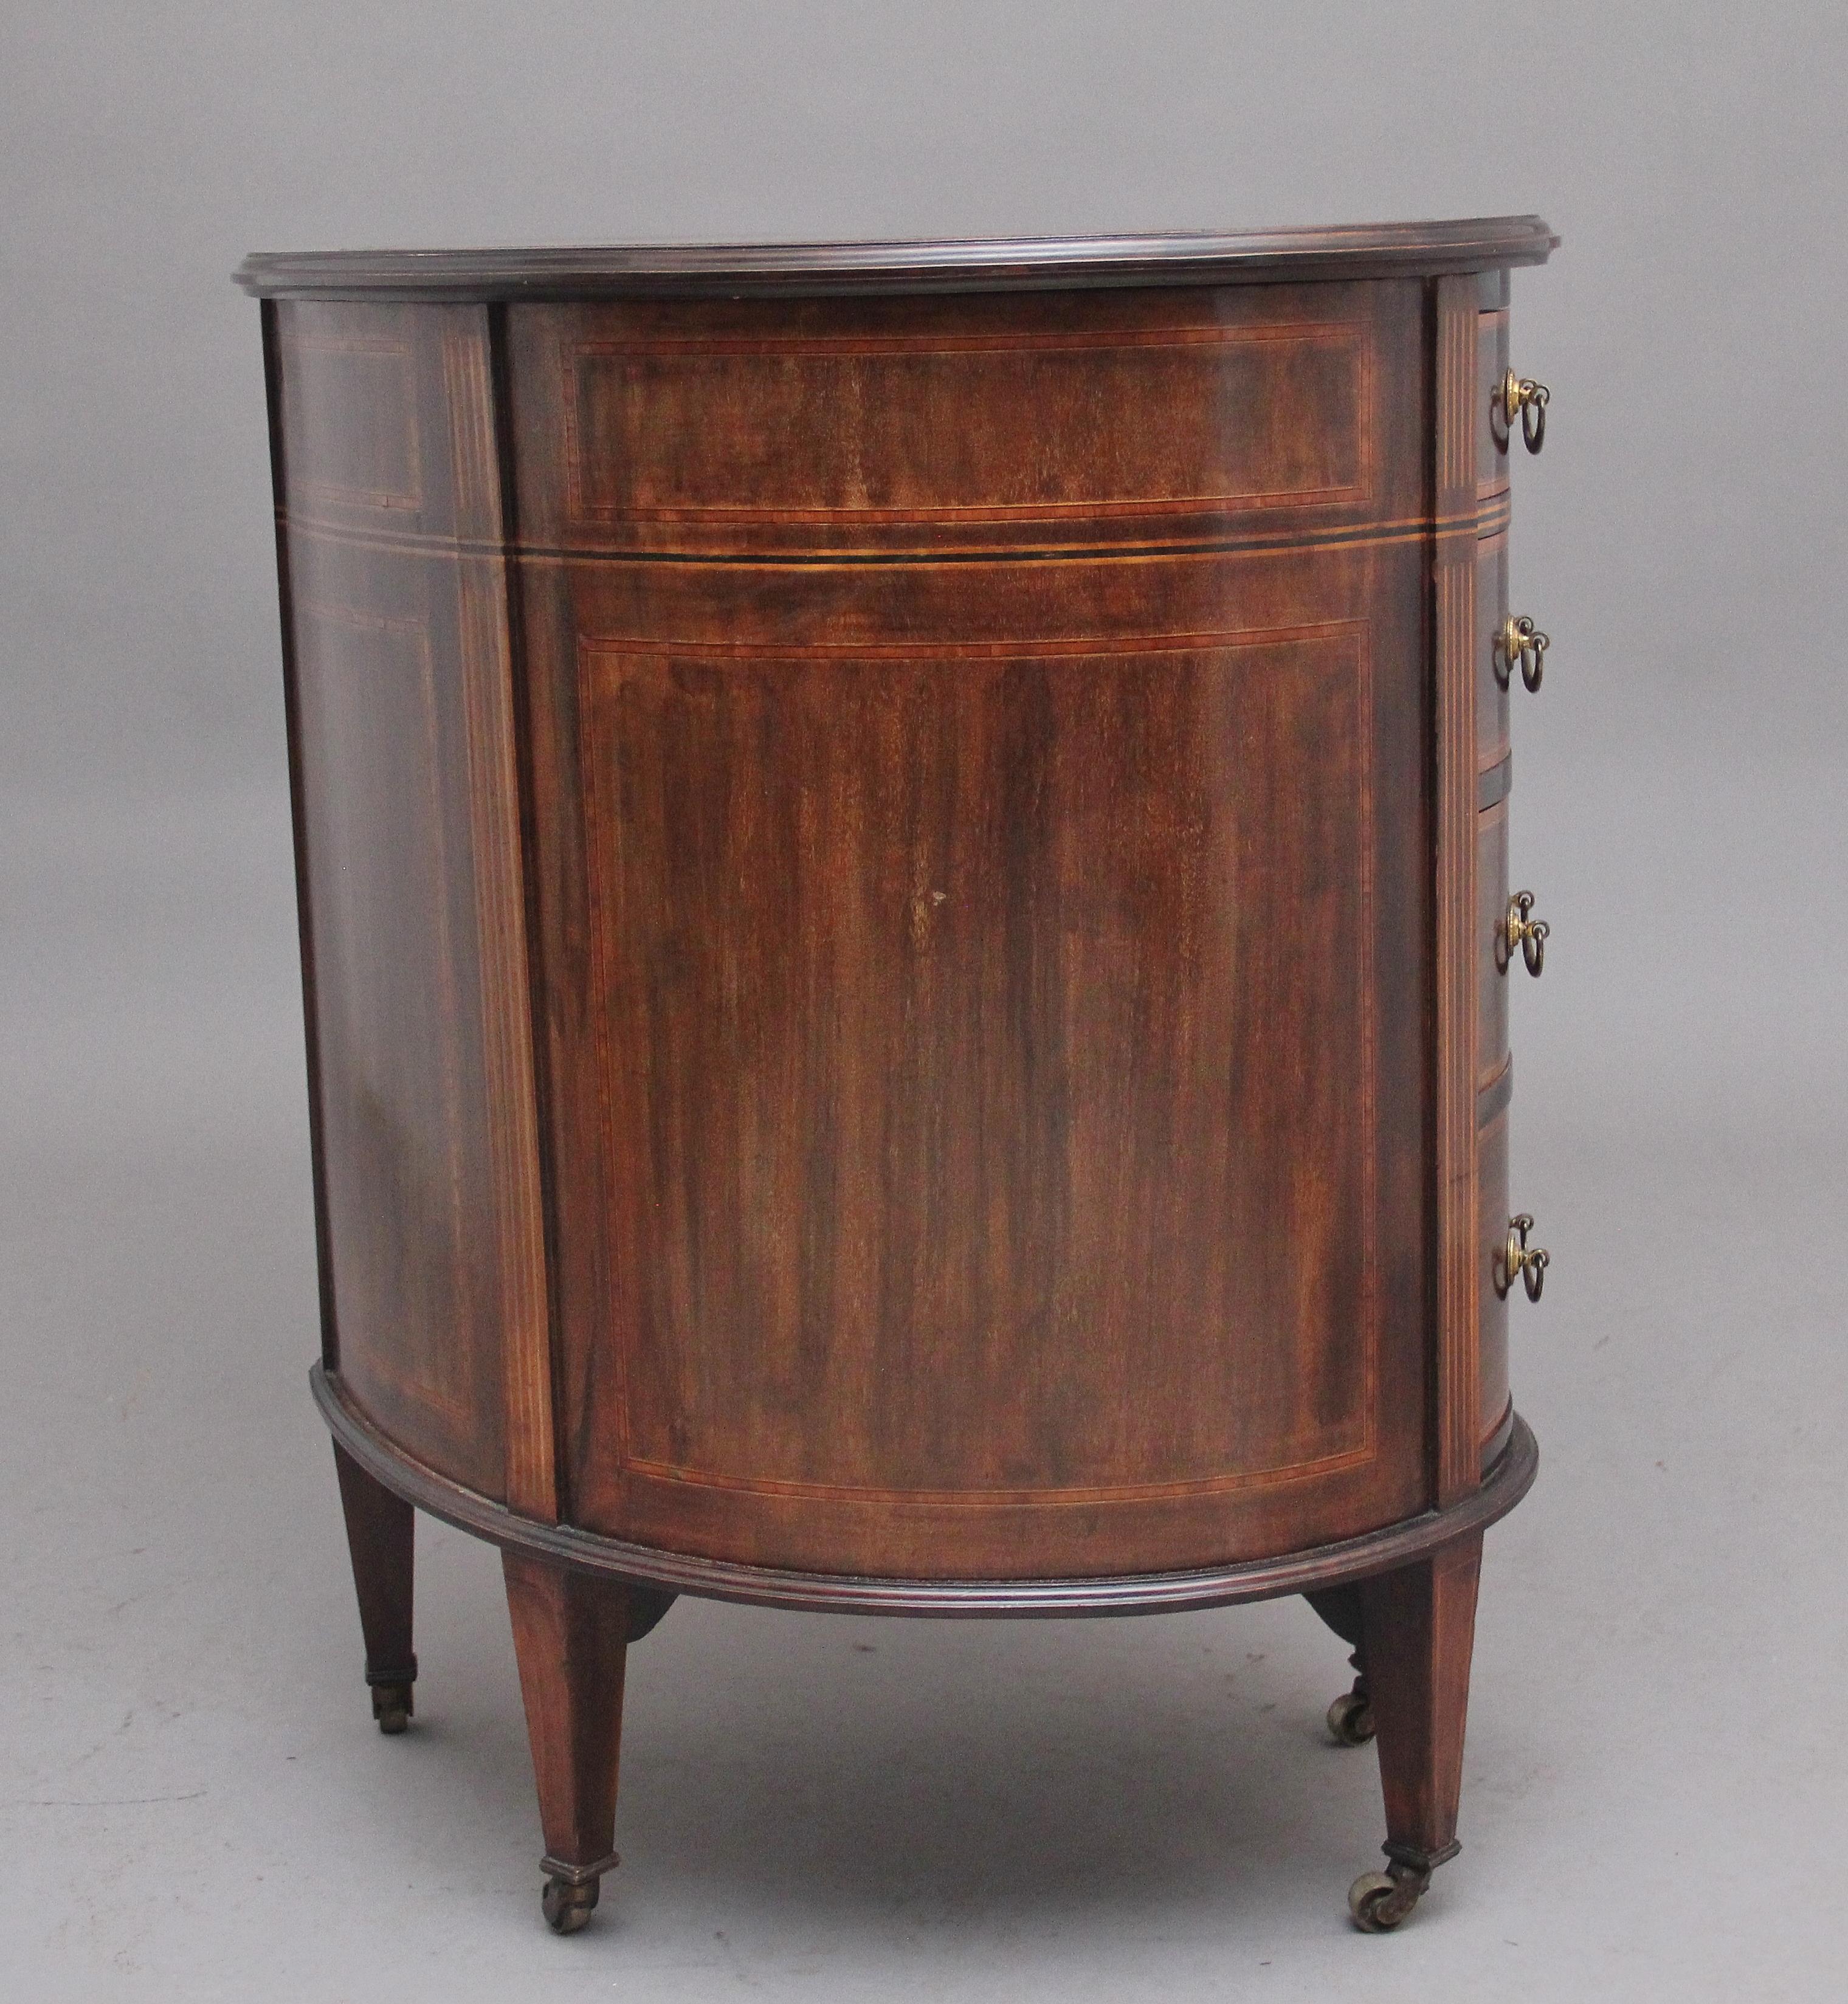 19th Century Inlaid Mahogany Kidney Shaped Desk For Sale 1